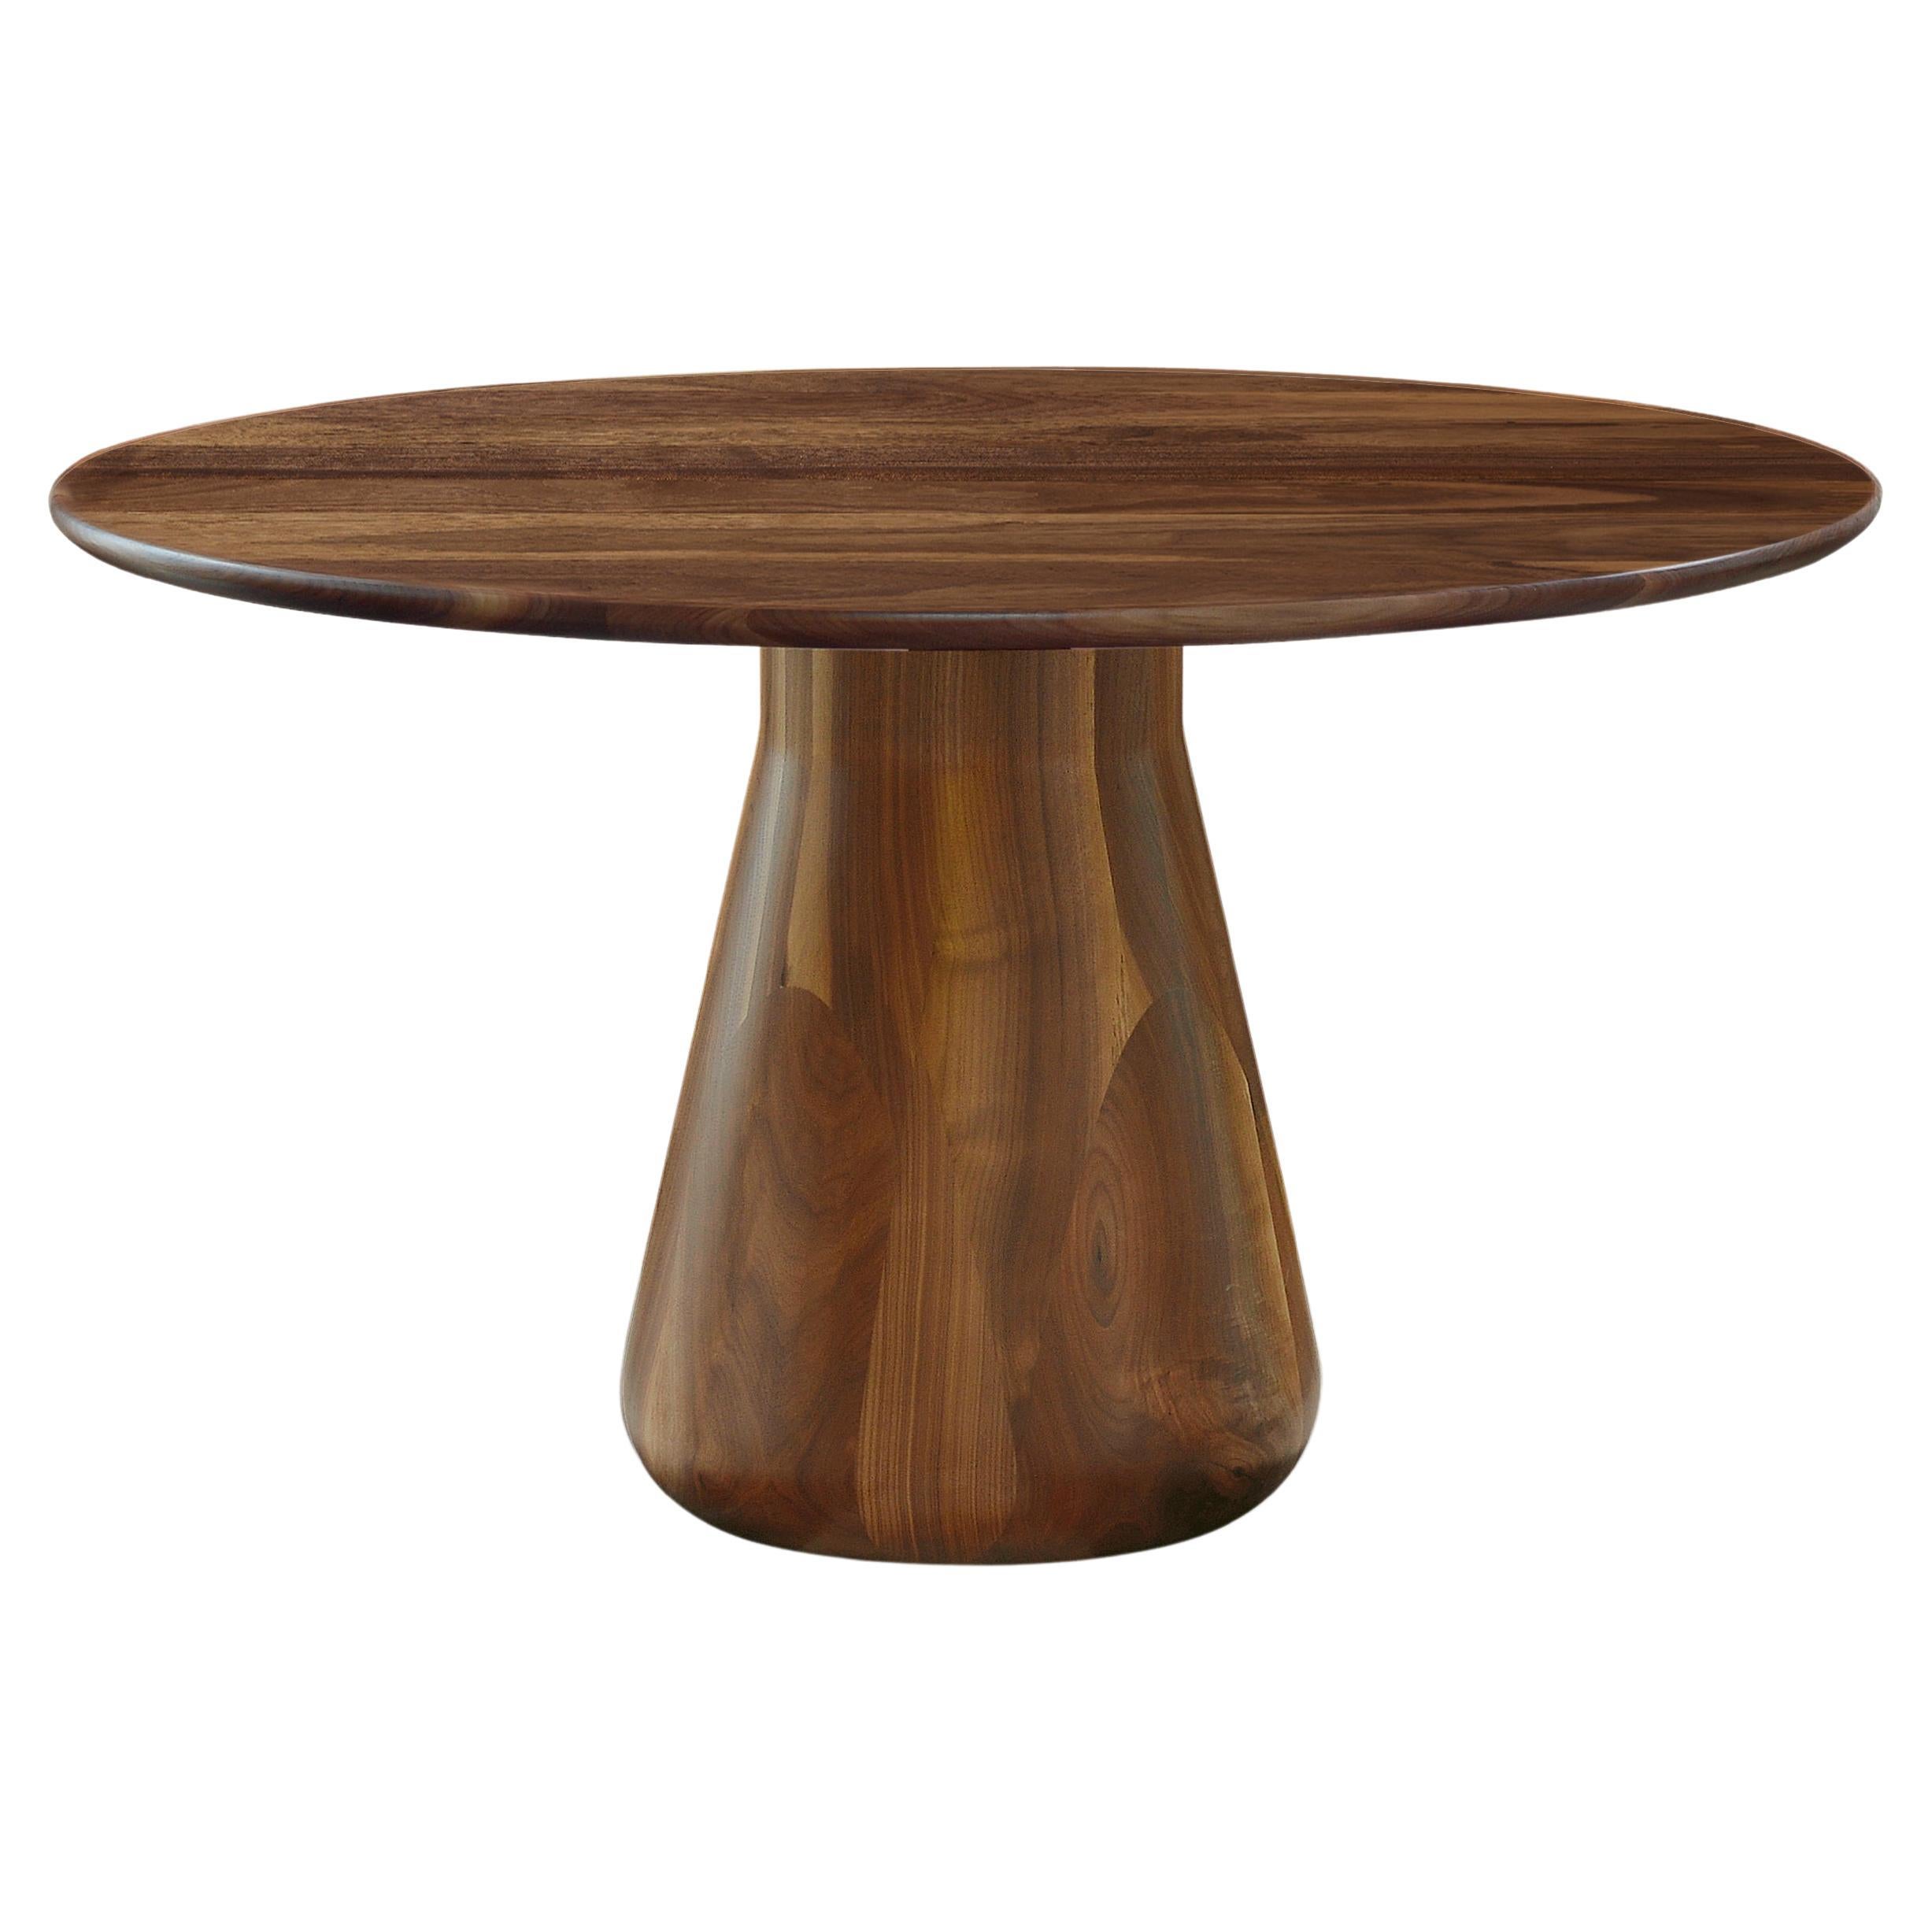 Convivio Solid Wood Table, Walnut in Hand-Made Natural Finish, Contemporary